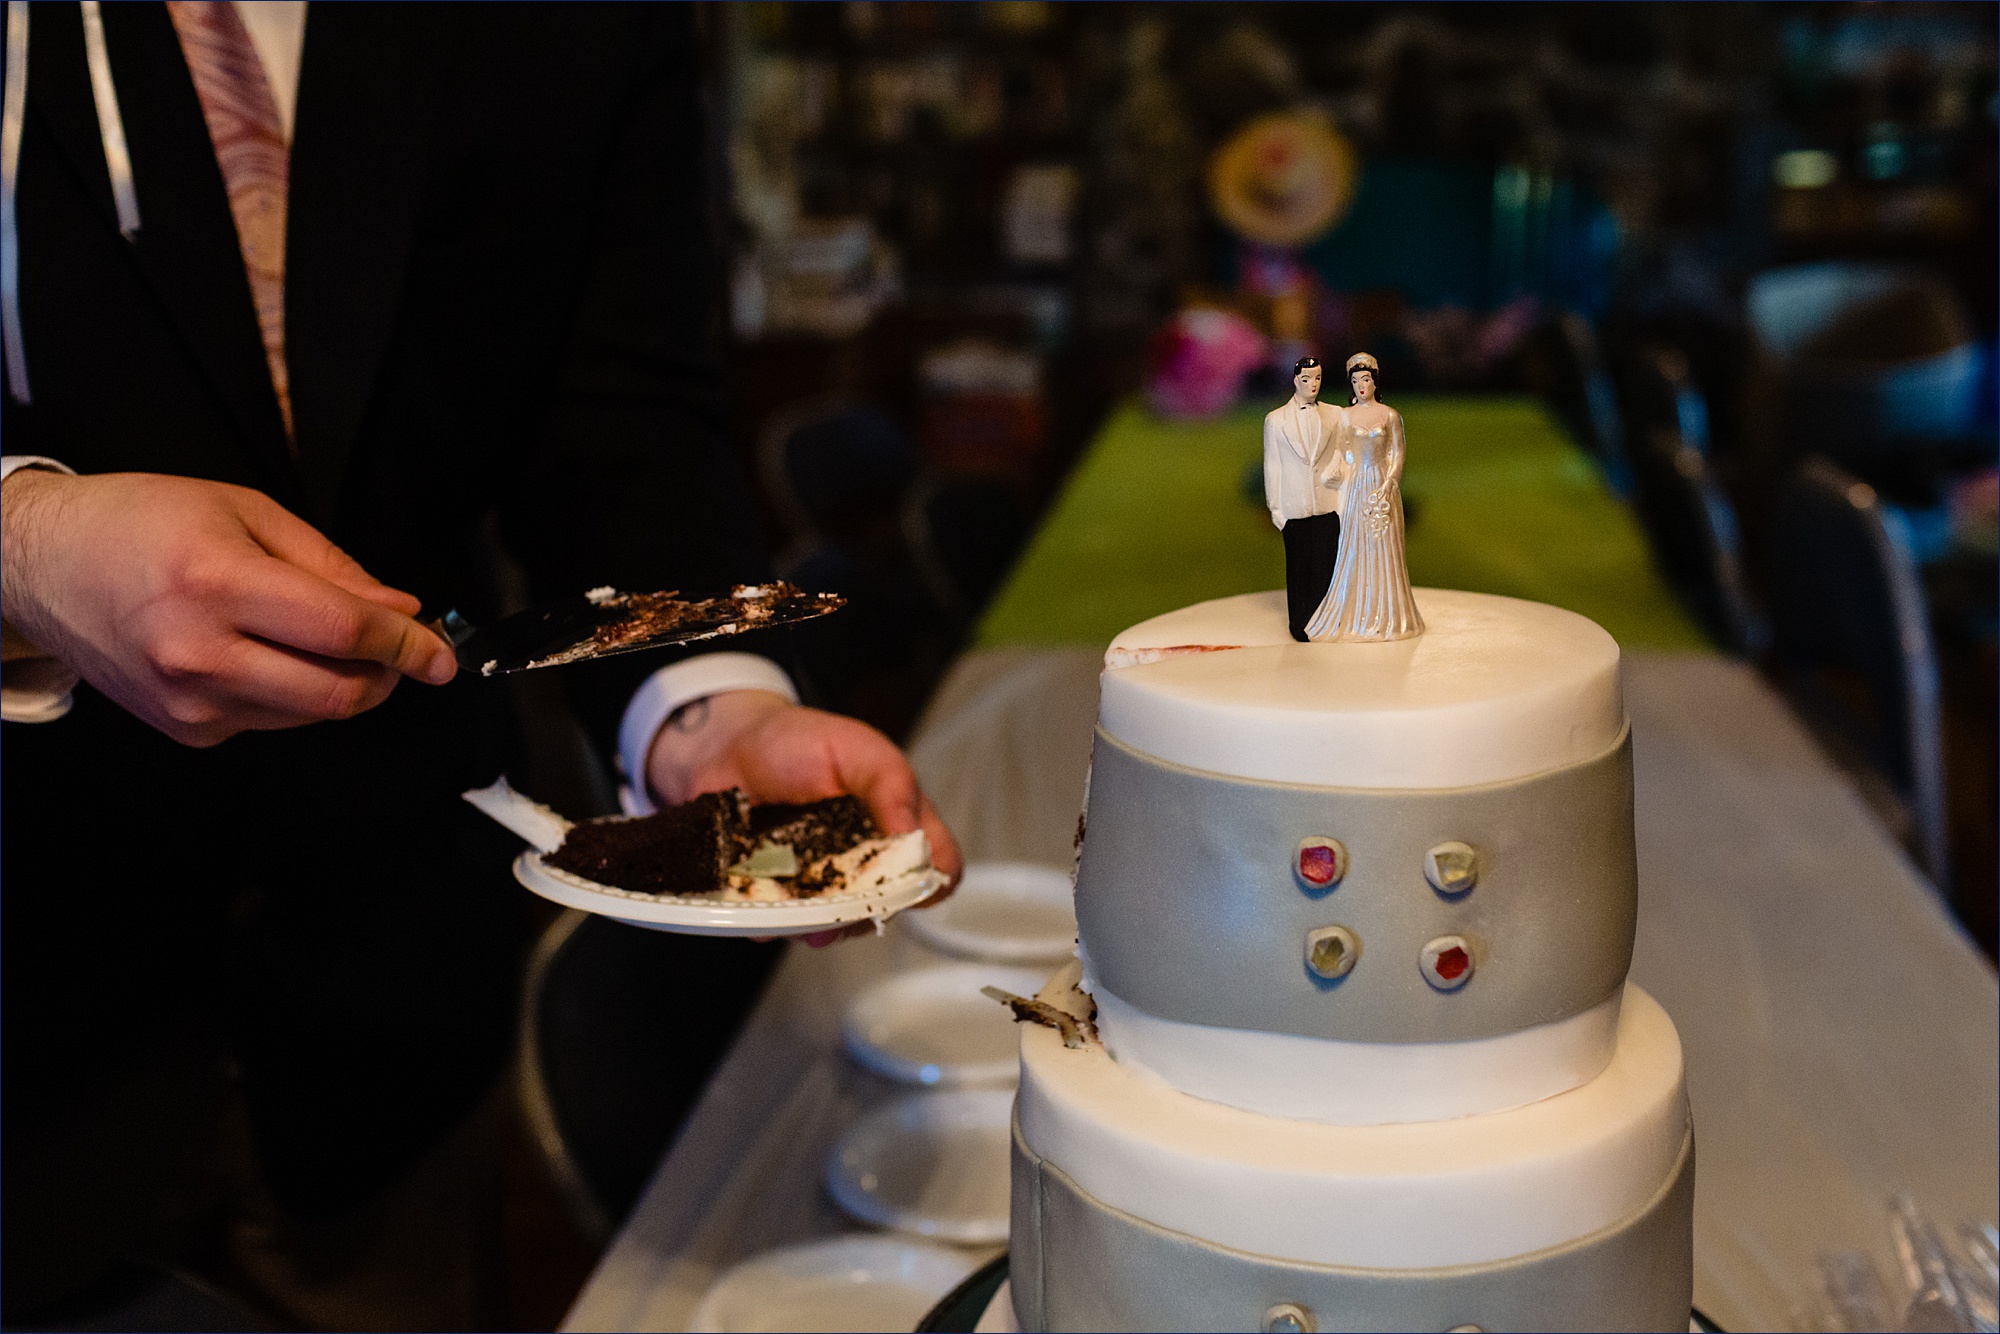 The groom cuts into the wedding cake in the Maine farmhouse living room